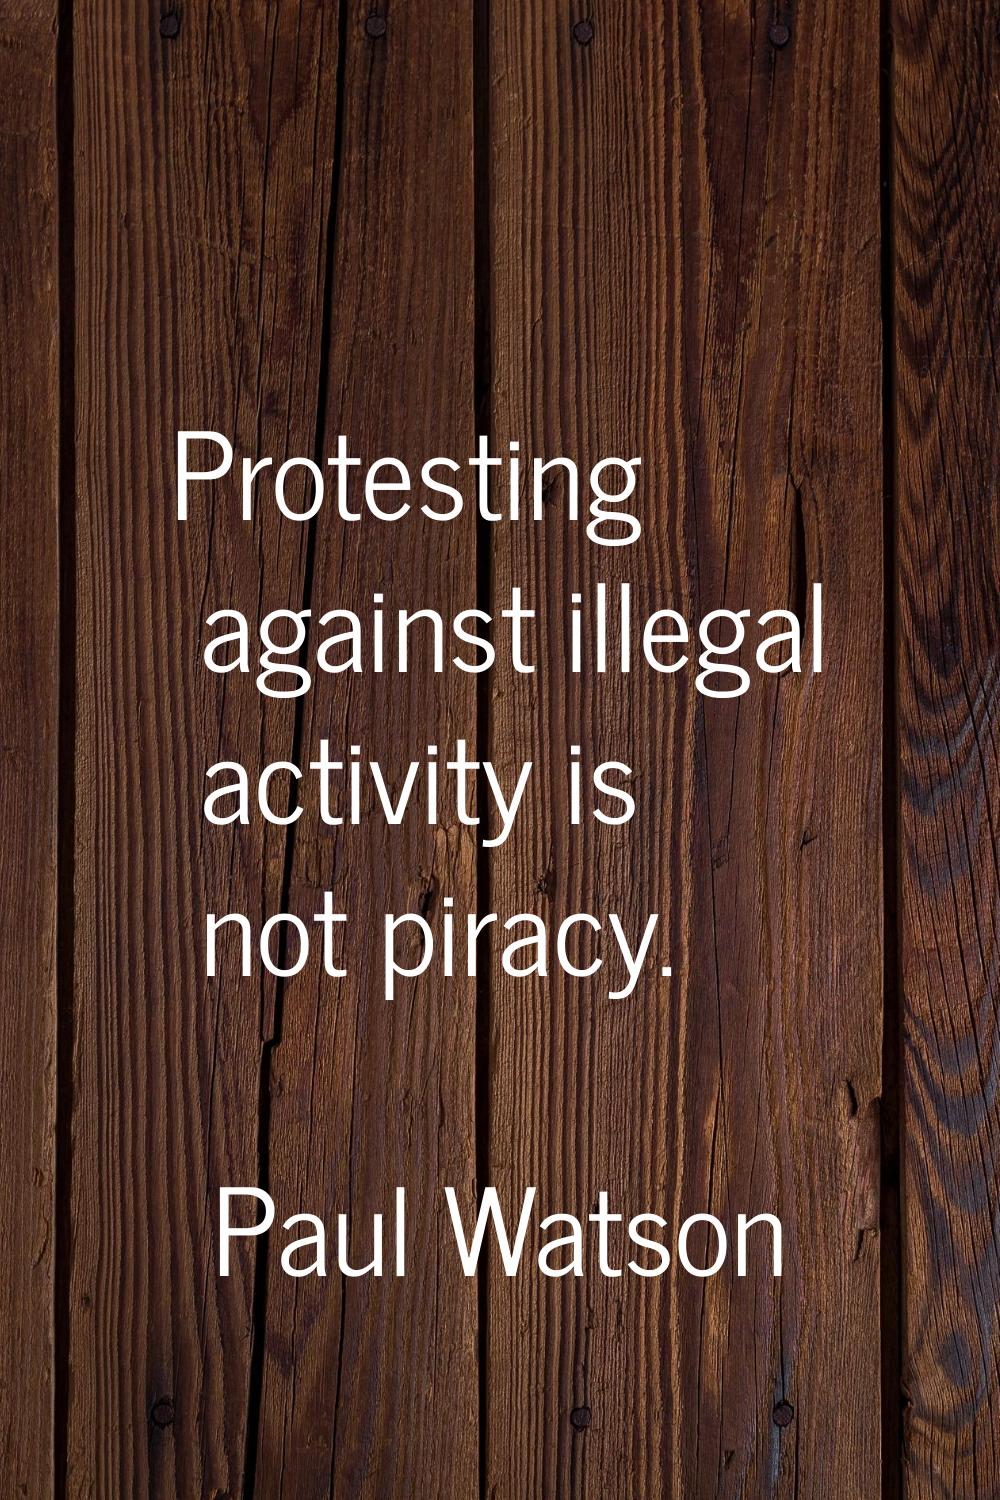 Protesting against illegal activity is not piracy.